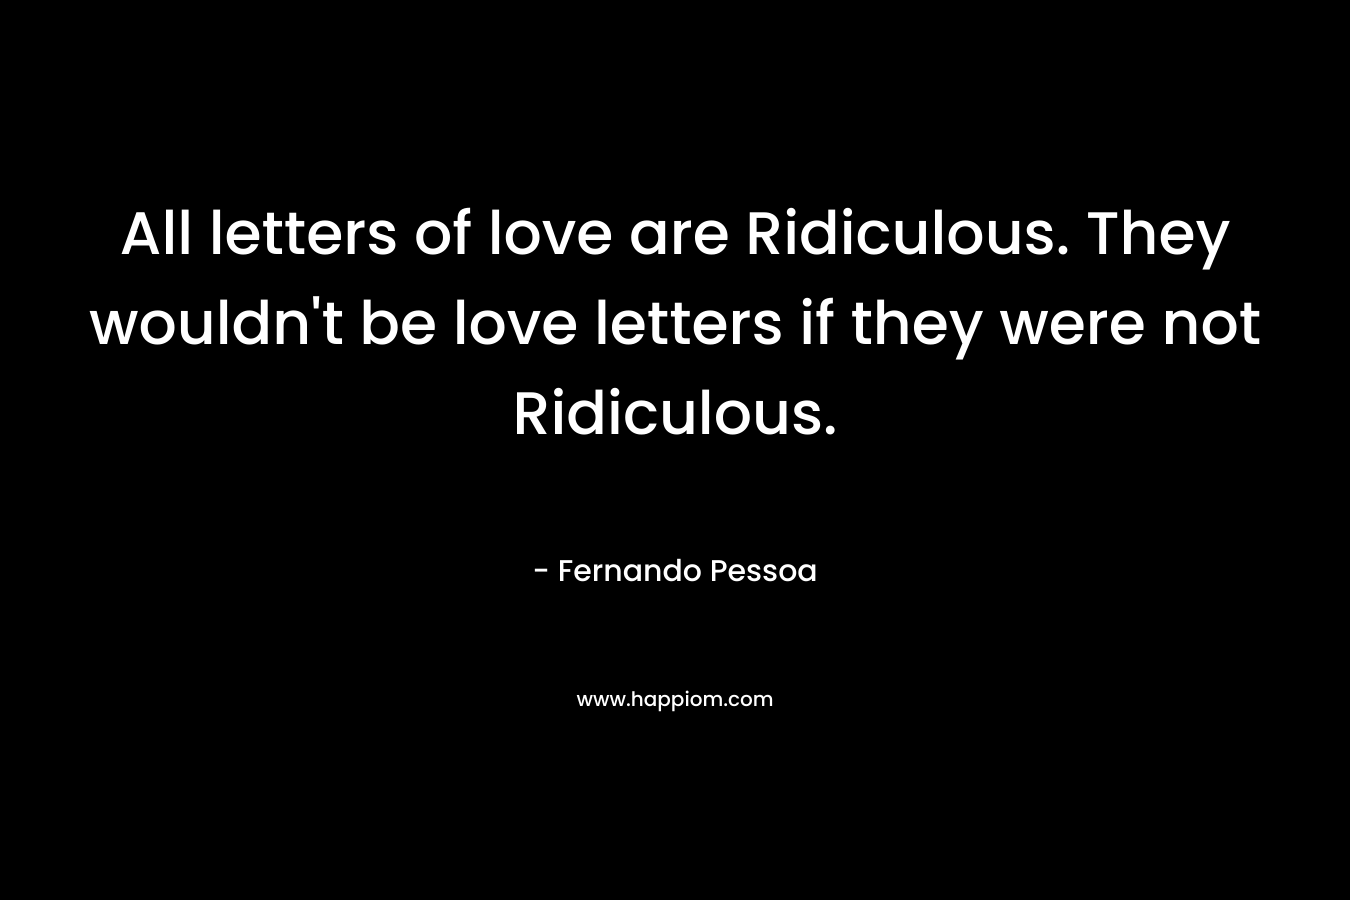 All letters of love are Ridiculous. They wouldn't be love letters if they were not Ridiculous.